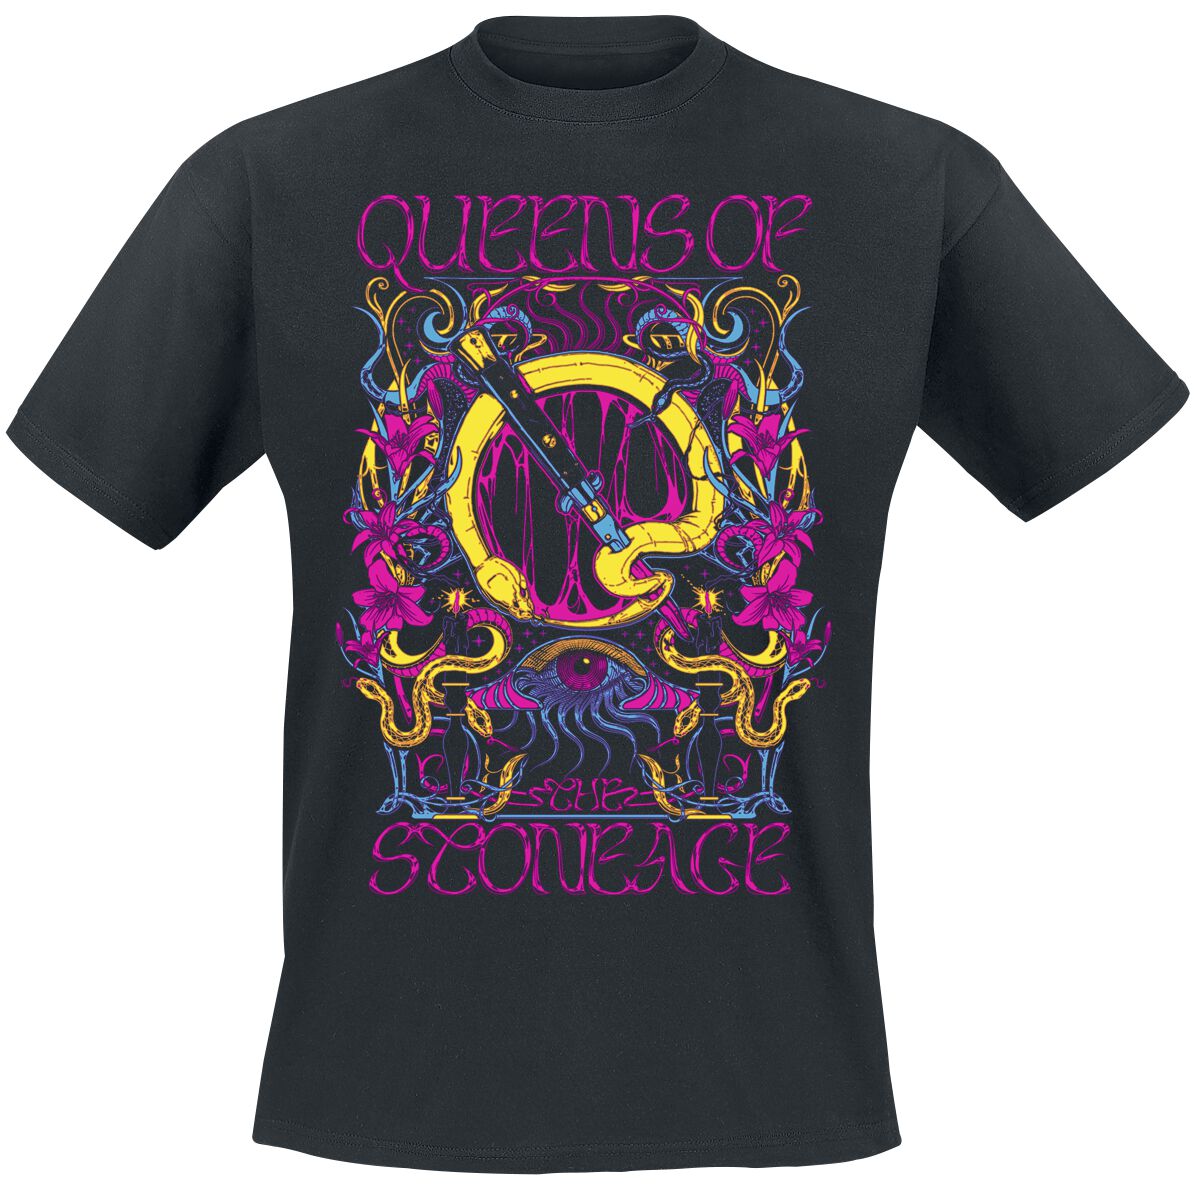 Queens Of The Stone Age In Times New Roman - Neon Sacrilege T-Shirt schwarz in 3XL